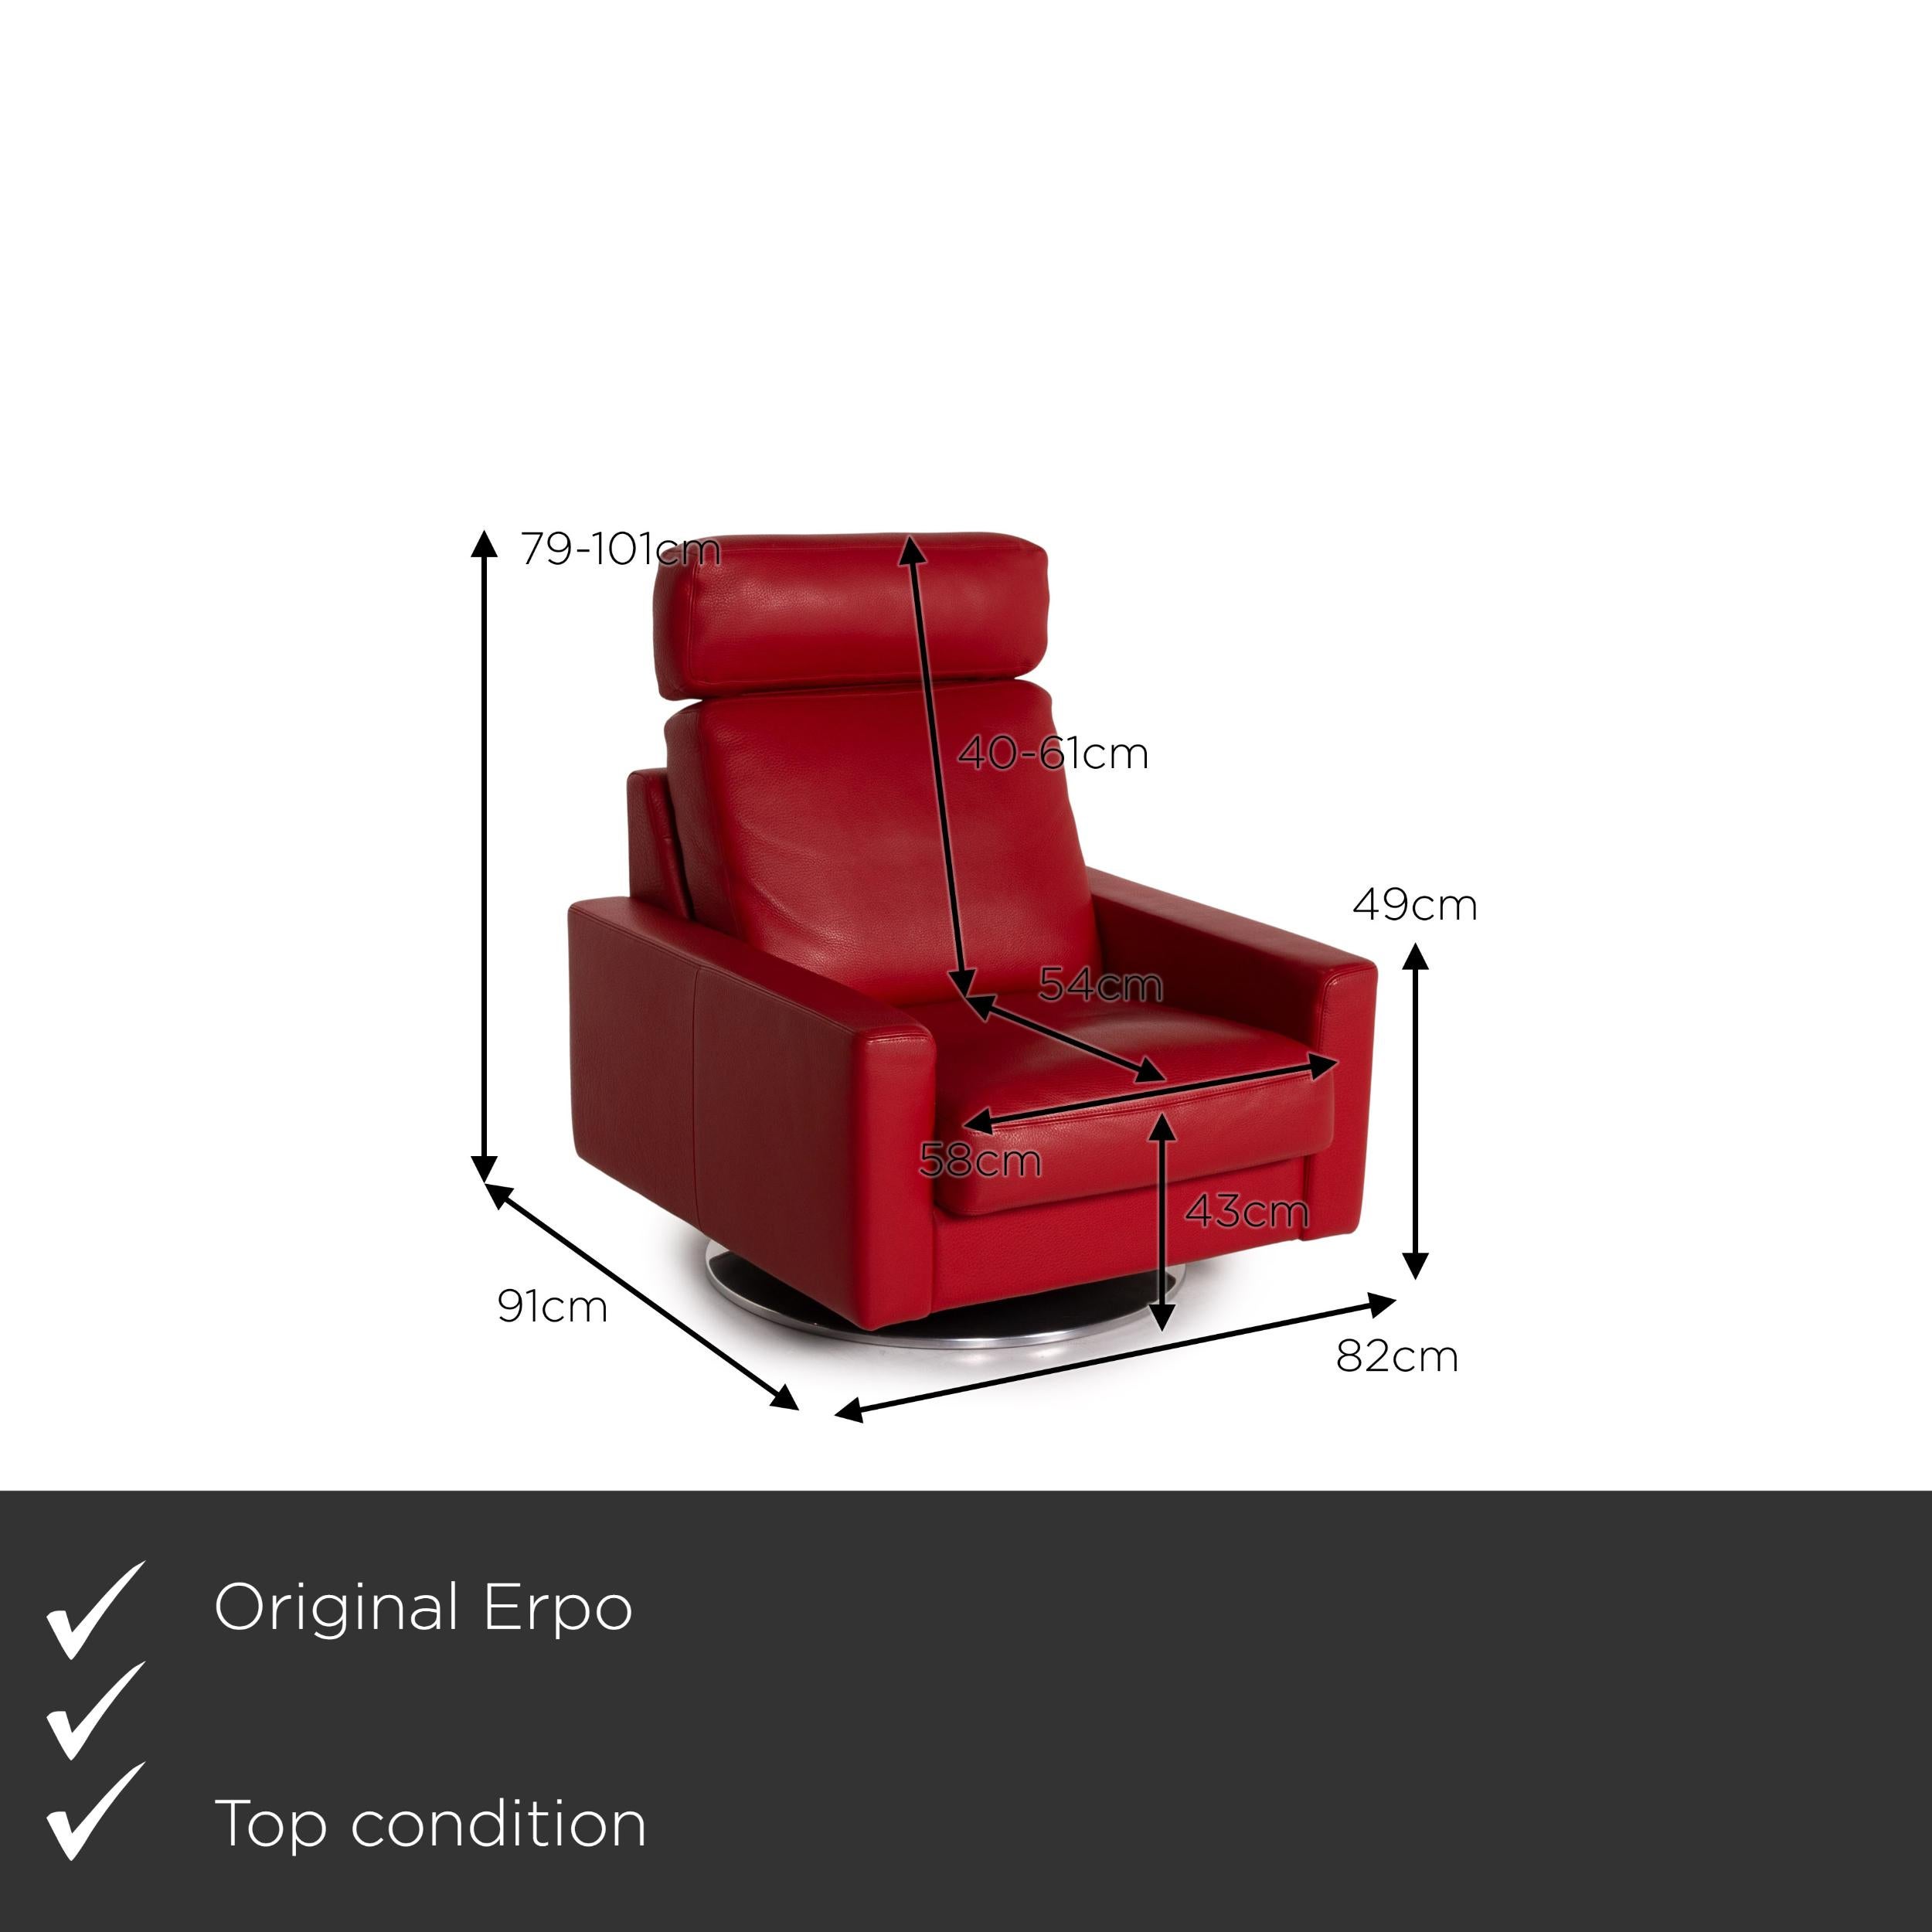 We present to you an Erpo leather armchair incl. Stool red.

 

 Product measurements in centimeters:
 

Depth 91
Width 82
Height 101
Seat height 43
Rest height 49
Seat depth 54
Seat width 58
Back height 61.